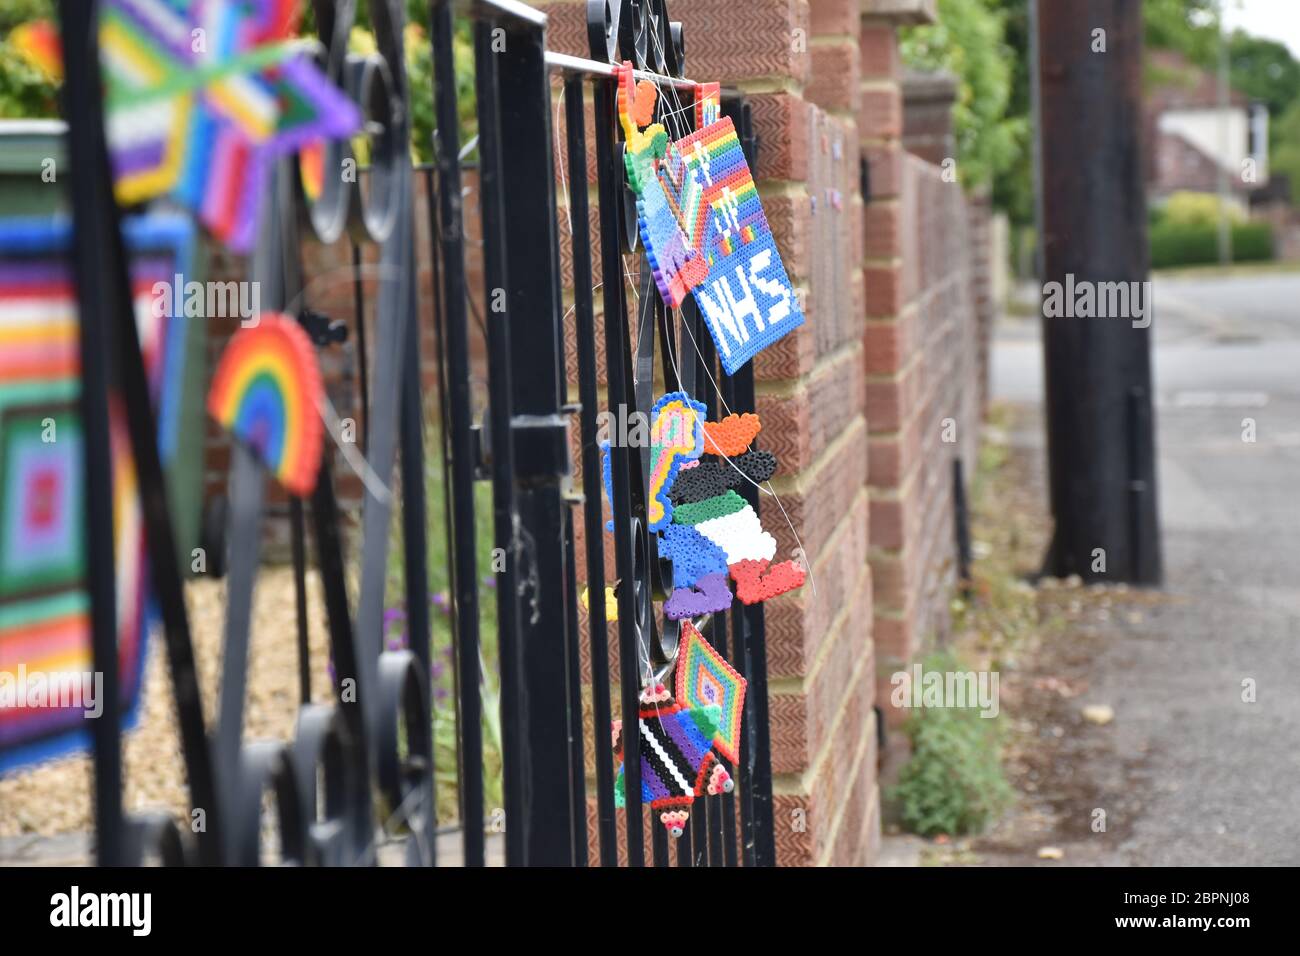 Oxford, Oxfordshire UK - 05 17 20: Rainbow signs have become very popular as a sign of hope amid the Cornovirus Lockdown. Here plastic signs are hung Stock Photo